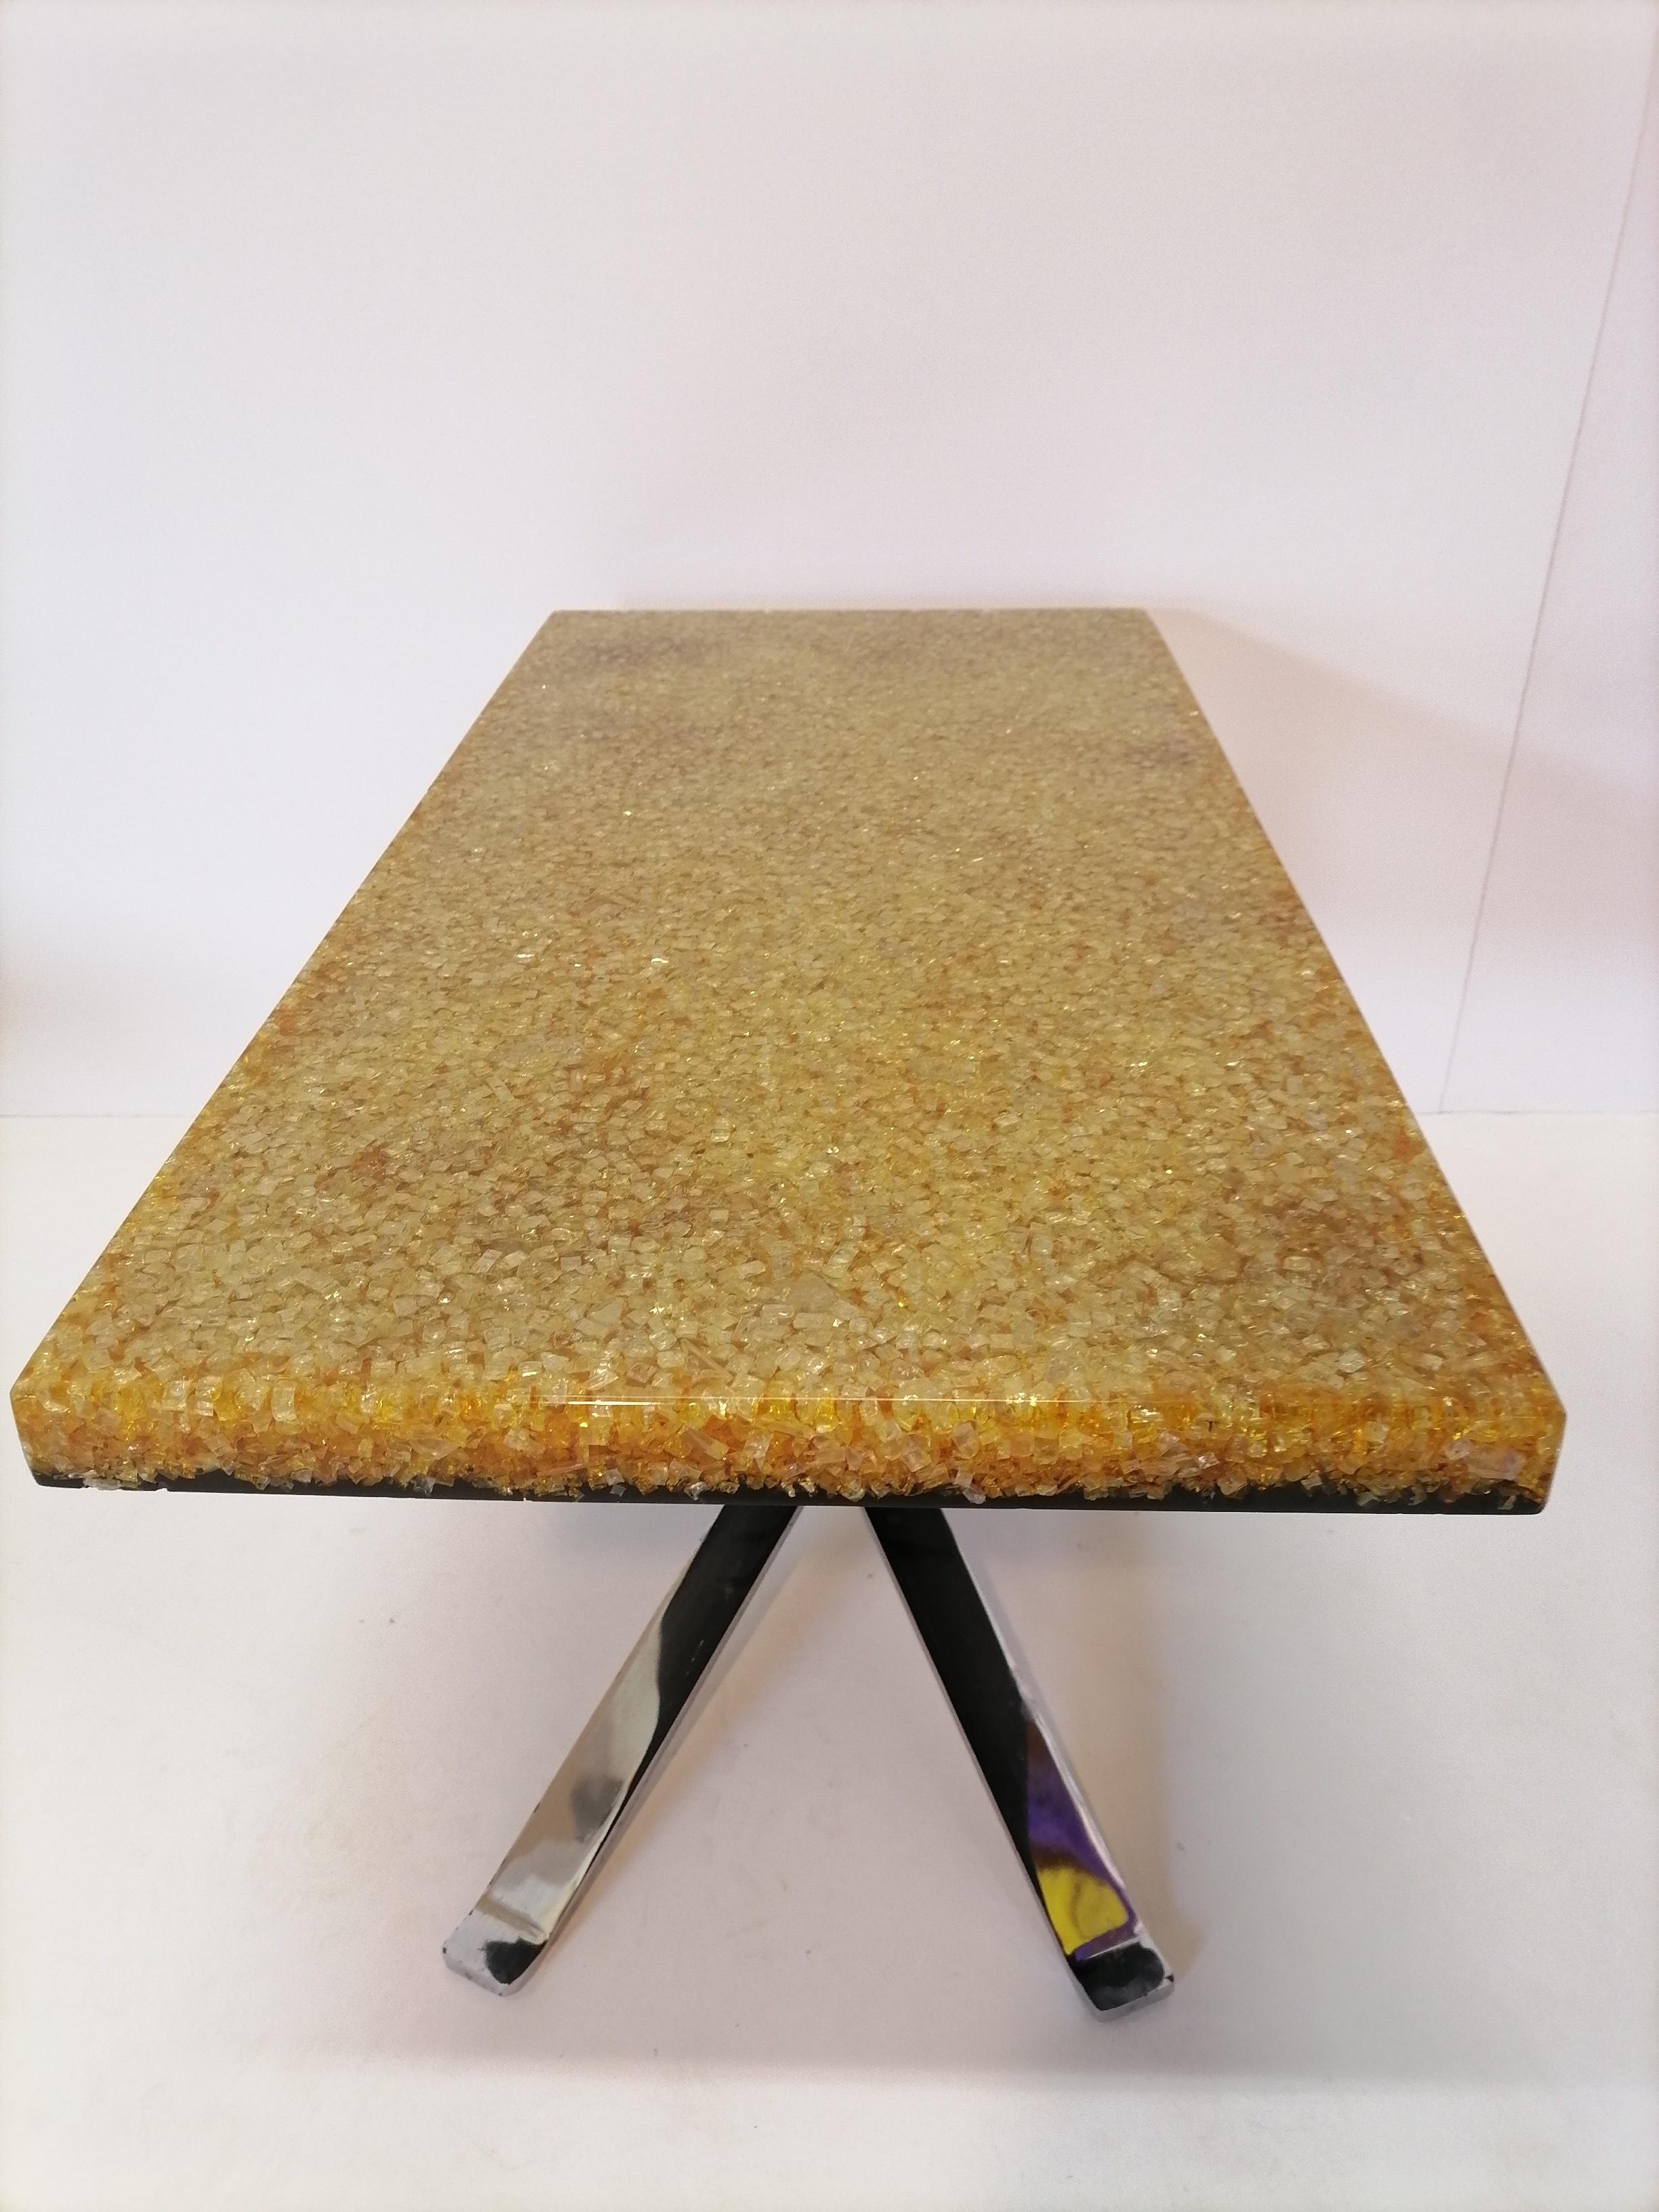 1970s resin coffee table Pierre Giraudon, France

An orange resin and glass break top coffee table by Pierre Giraudon, France, 1970
The table is made from crackled resin with inclusions of broken glass supported by two brass-plated crossed